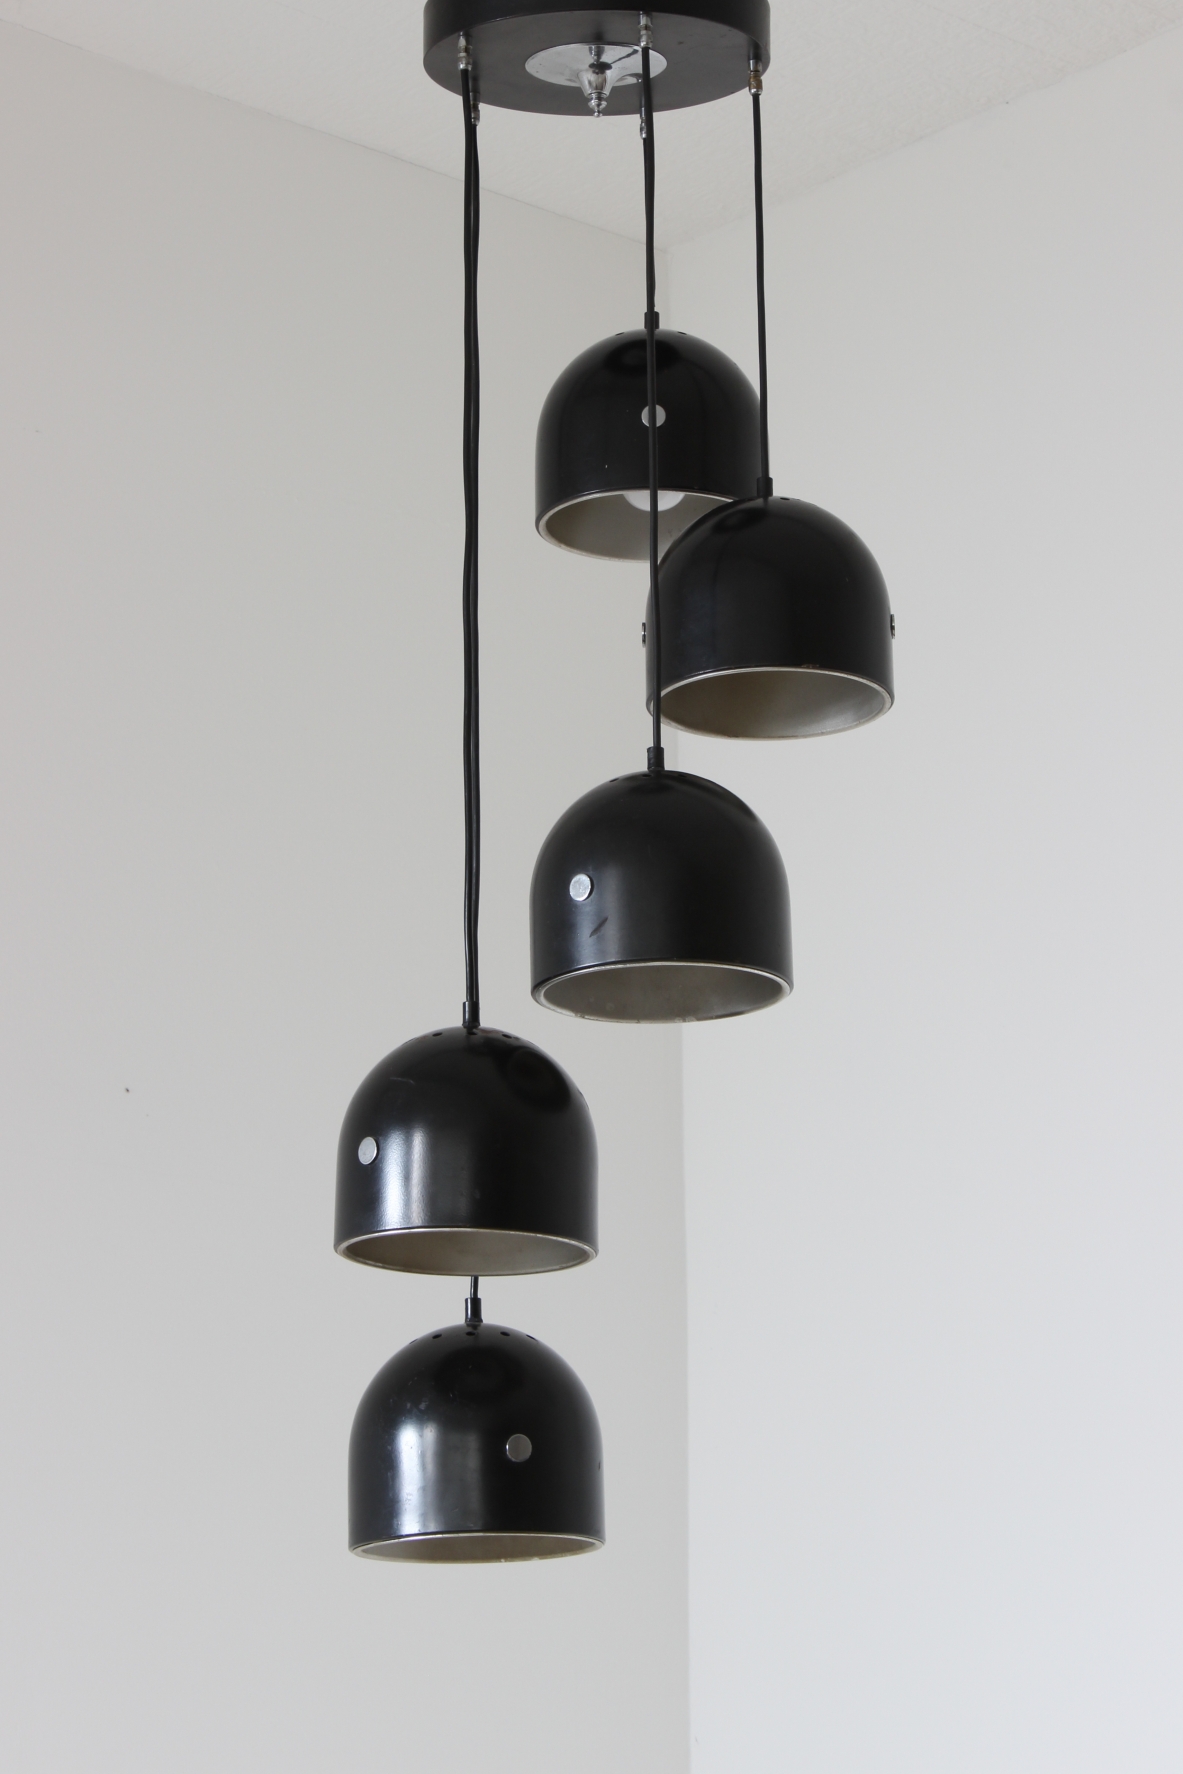 Ceiling lamp with 5 metal shades.  Italian manufacture, 1960's.